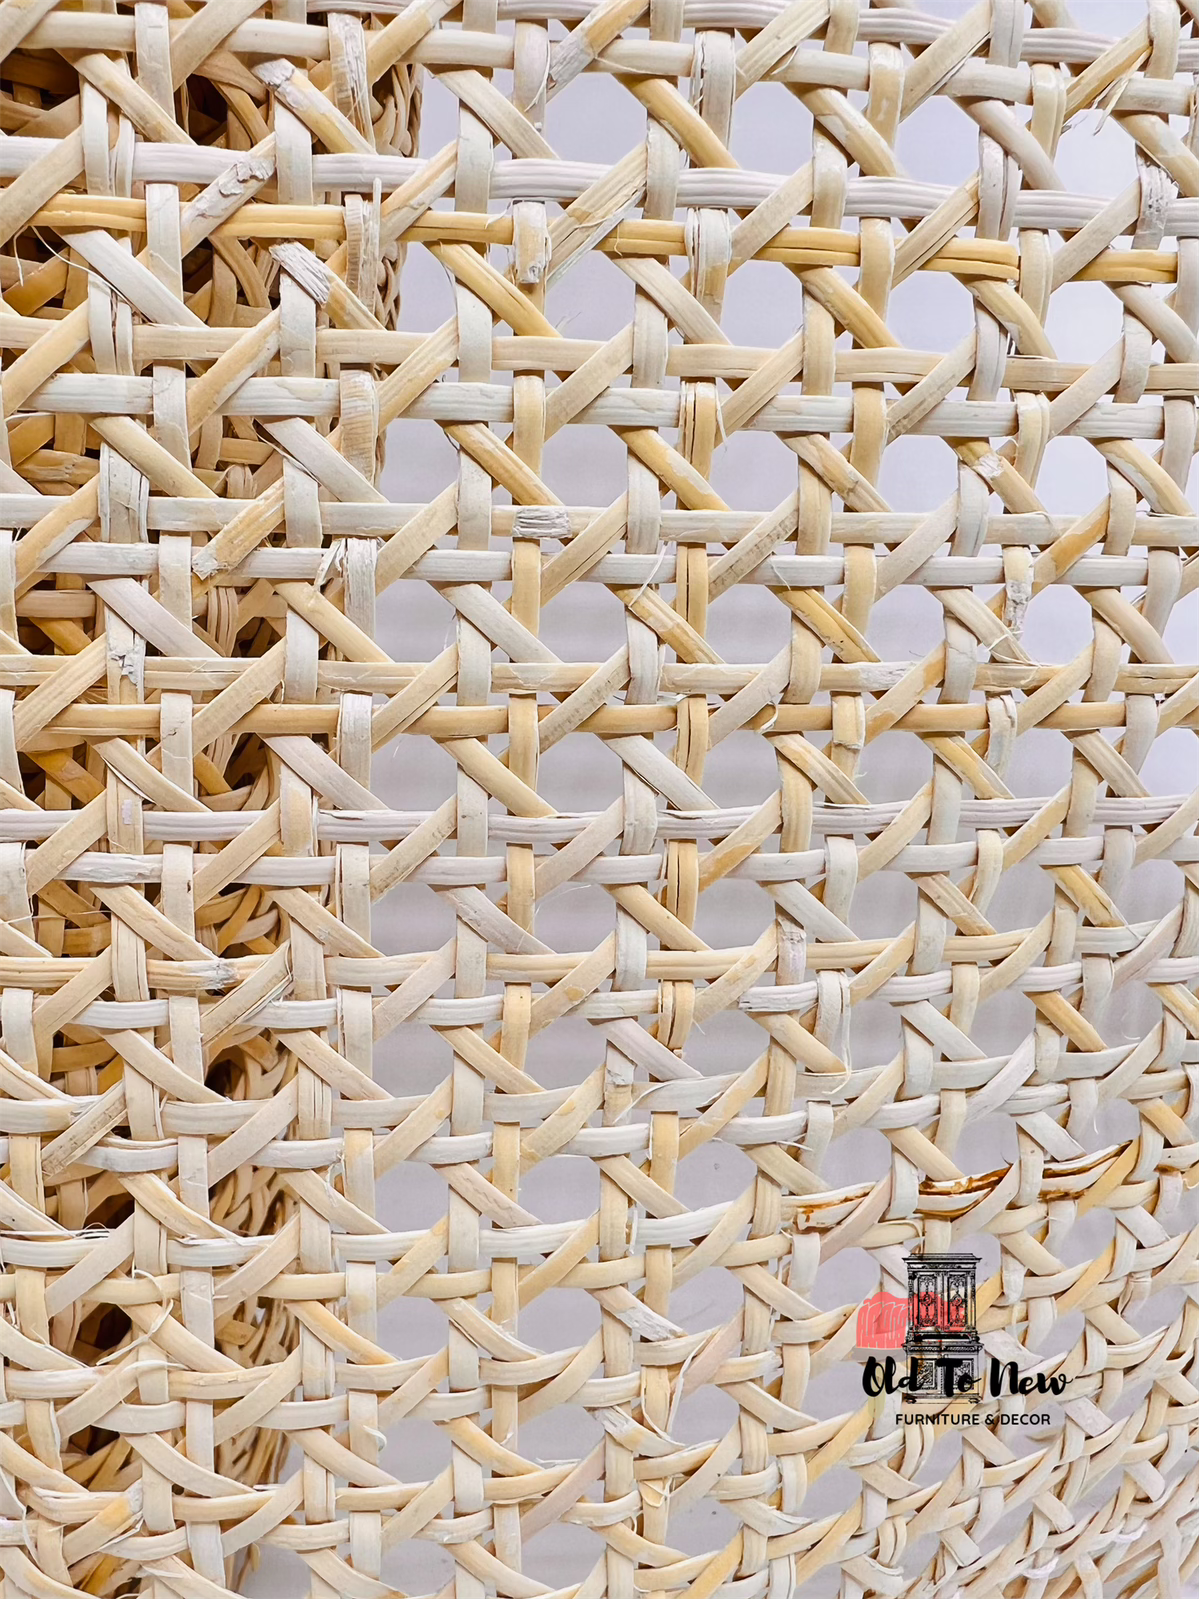 Cane Webbing Rattan Cane Sold in Mississauga